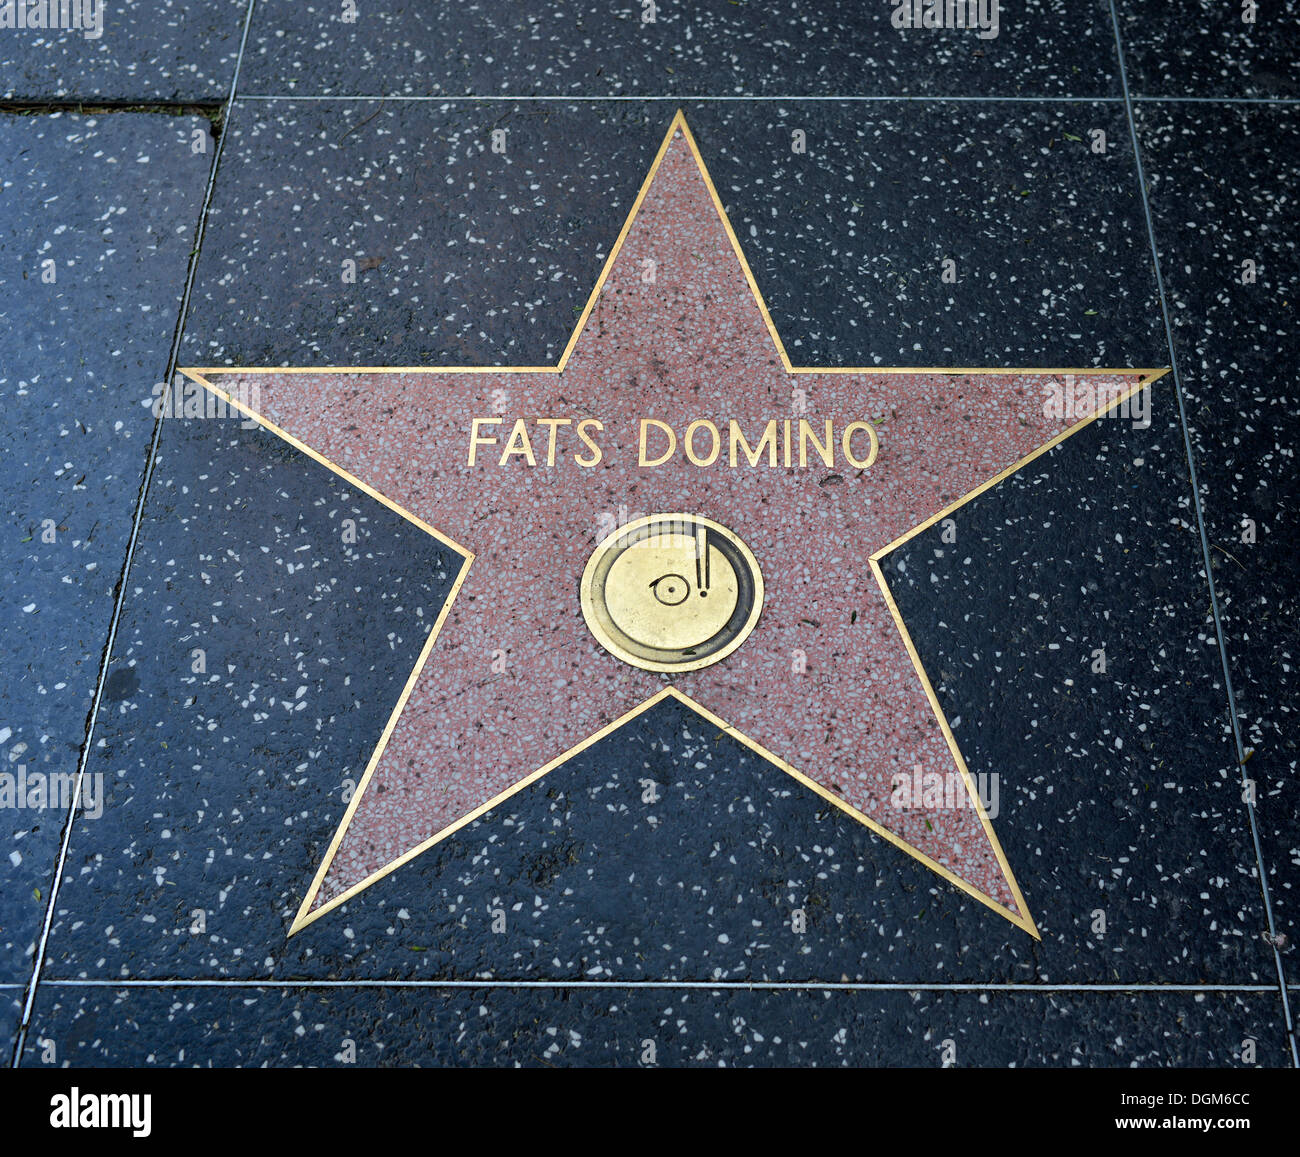 Terrazzo star pour le musicien Fats Domino, catégorie musique, Walk of Fame, Hollywood Boulevard, Hollywood, Los Angeles Banque D'Images